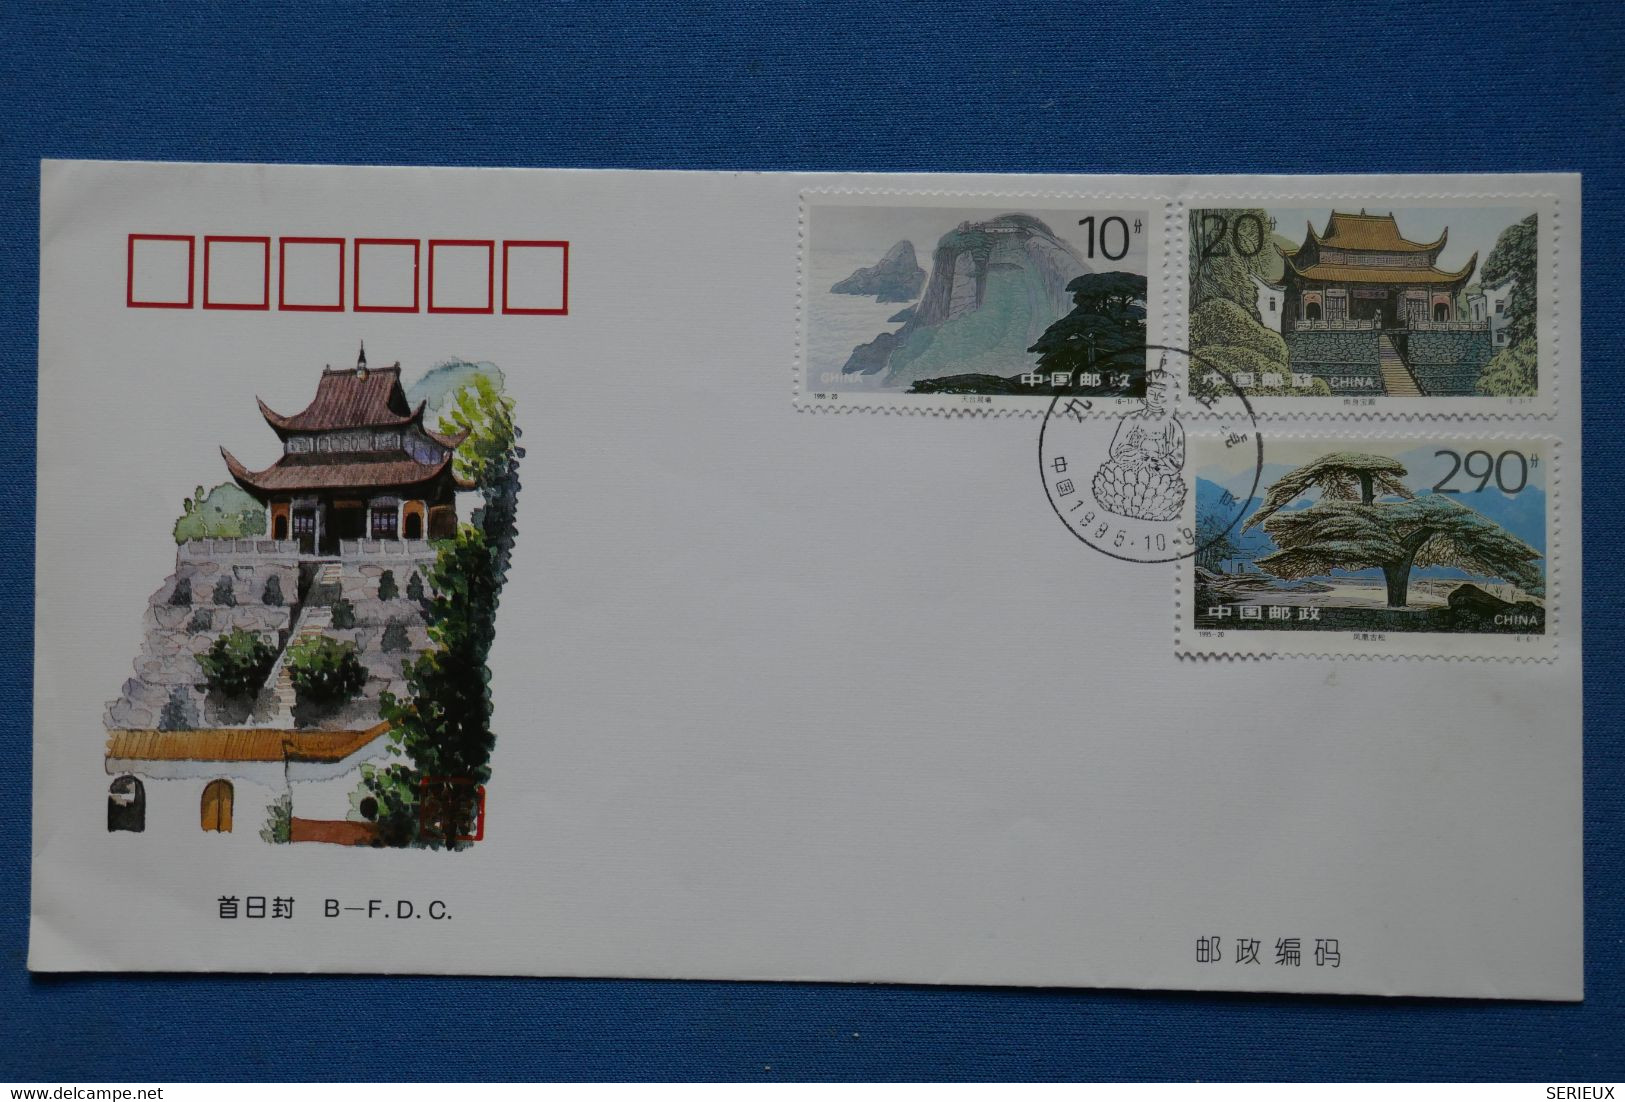 #7 CHINA BELLE LETTRE  FDC 1995  NON VOYAGEE. NEUVE  + - Covers & Documents